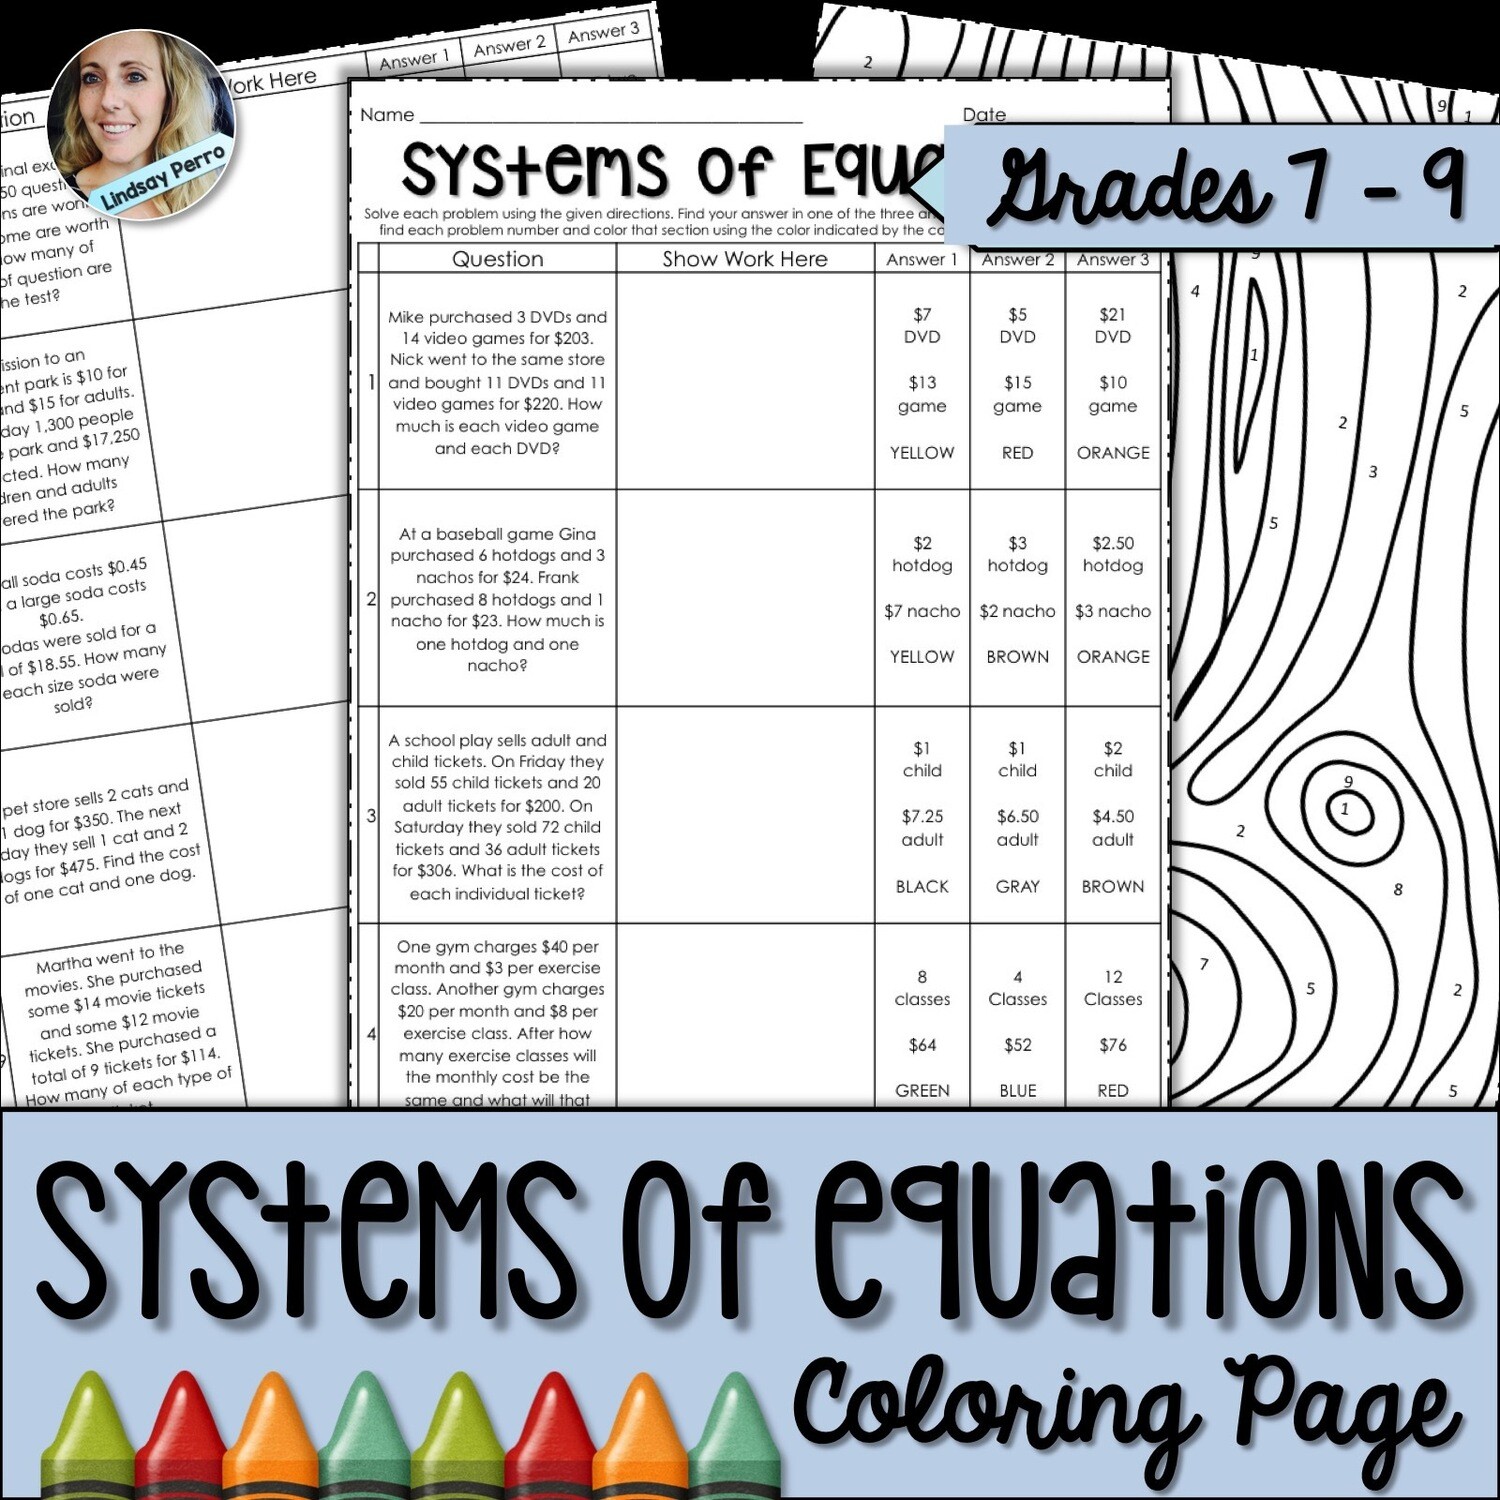 Systems of Equations Coloring Worksheet